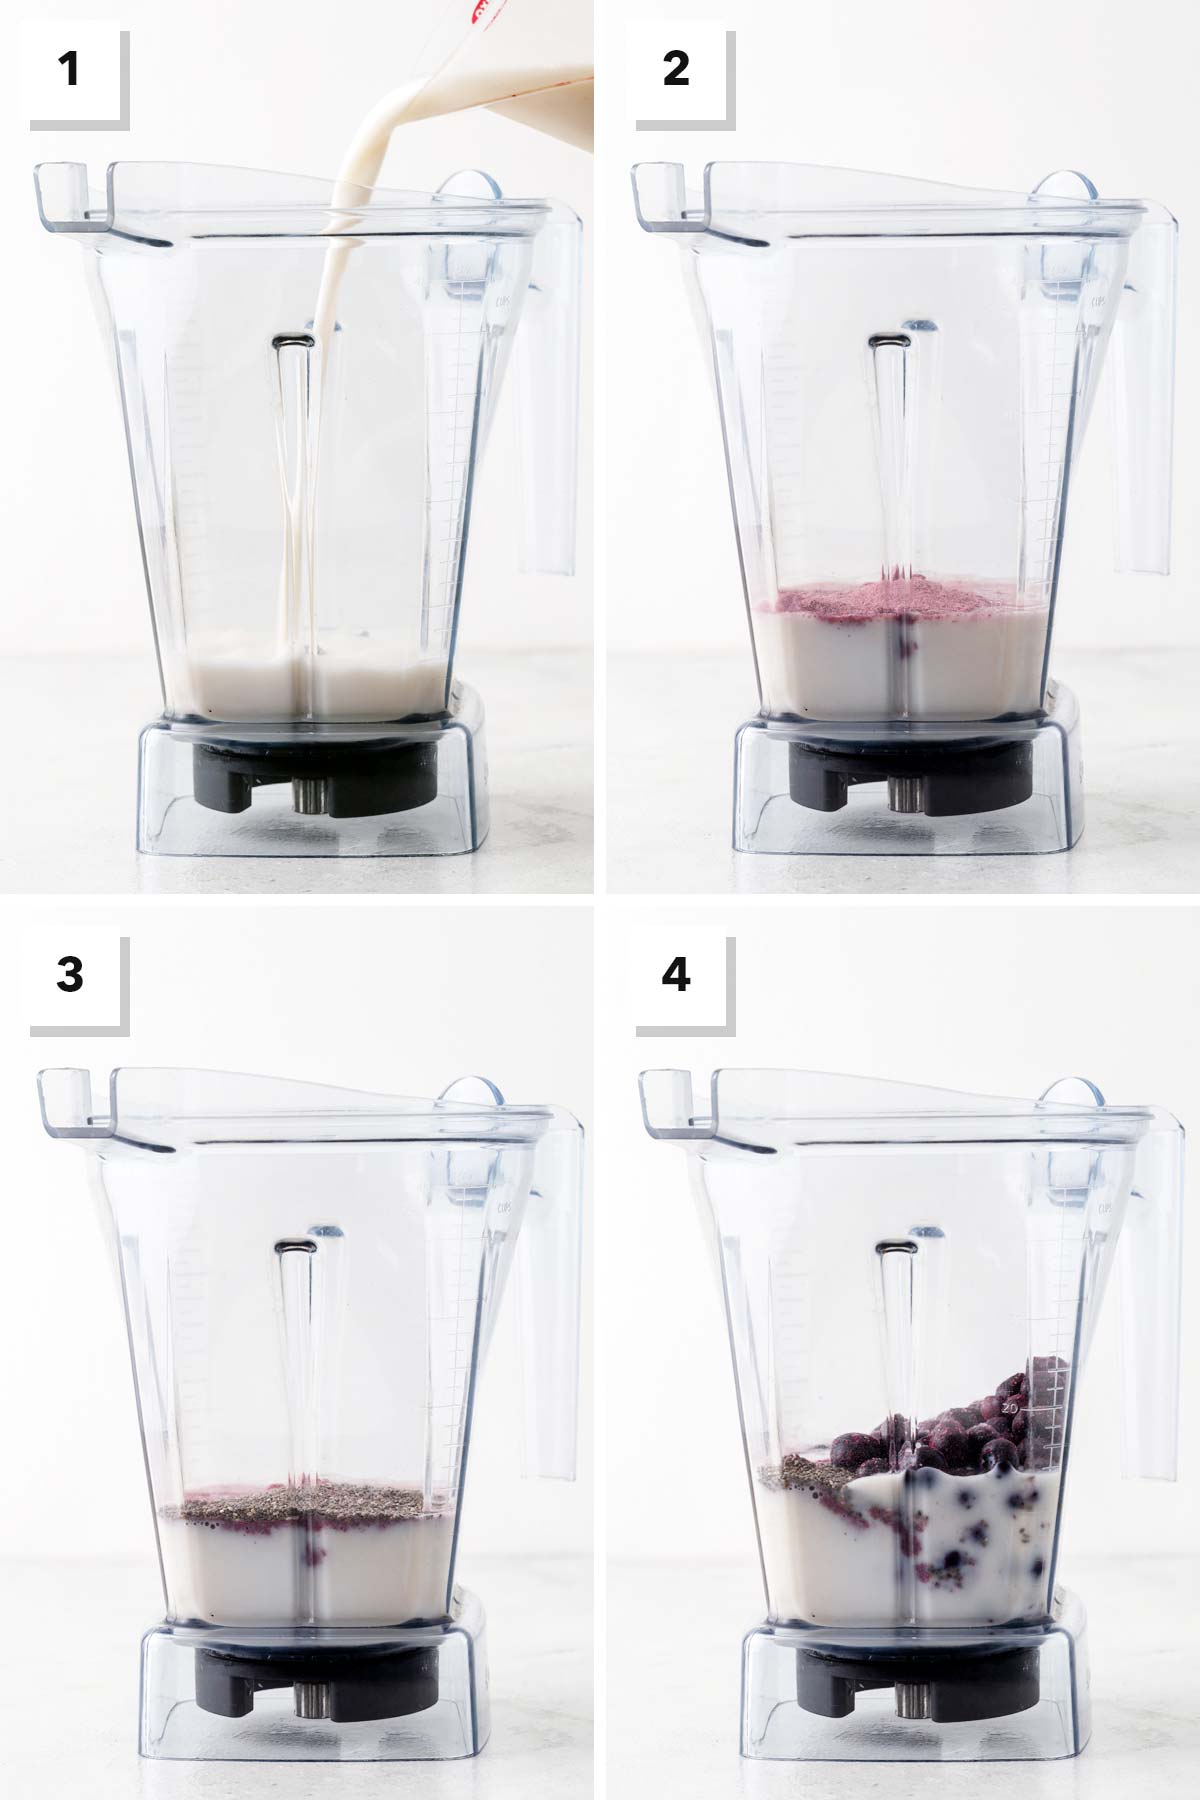 Steps for making a purple sweet potato smoothie.